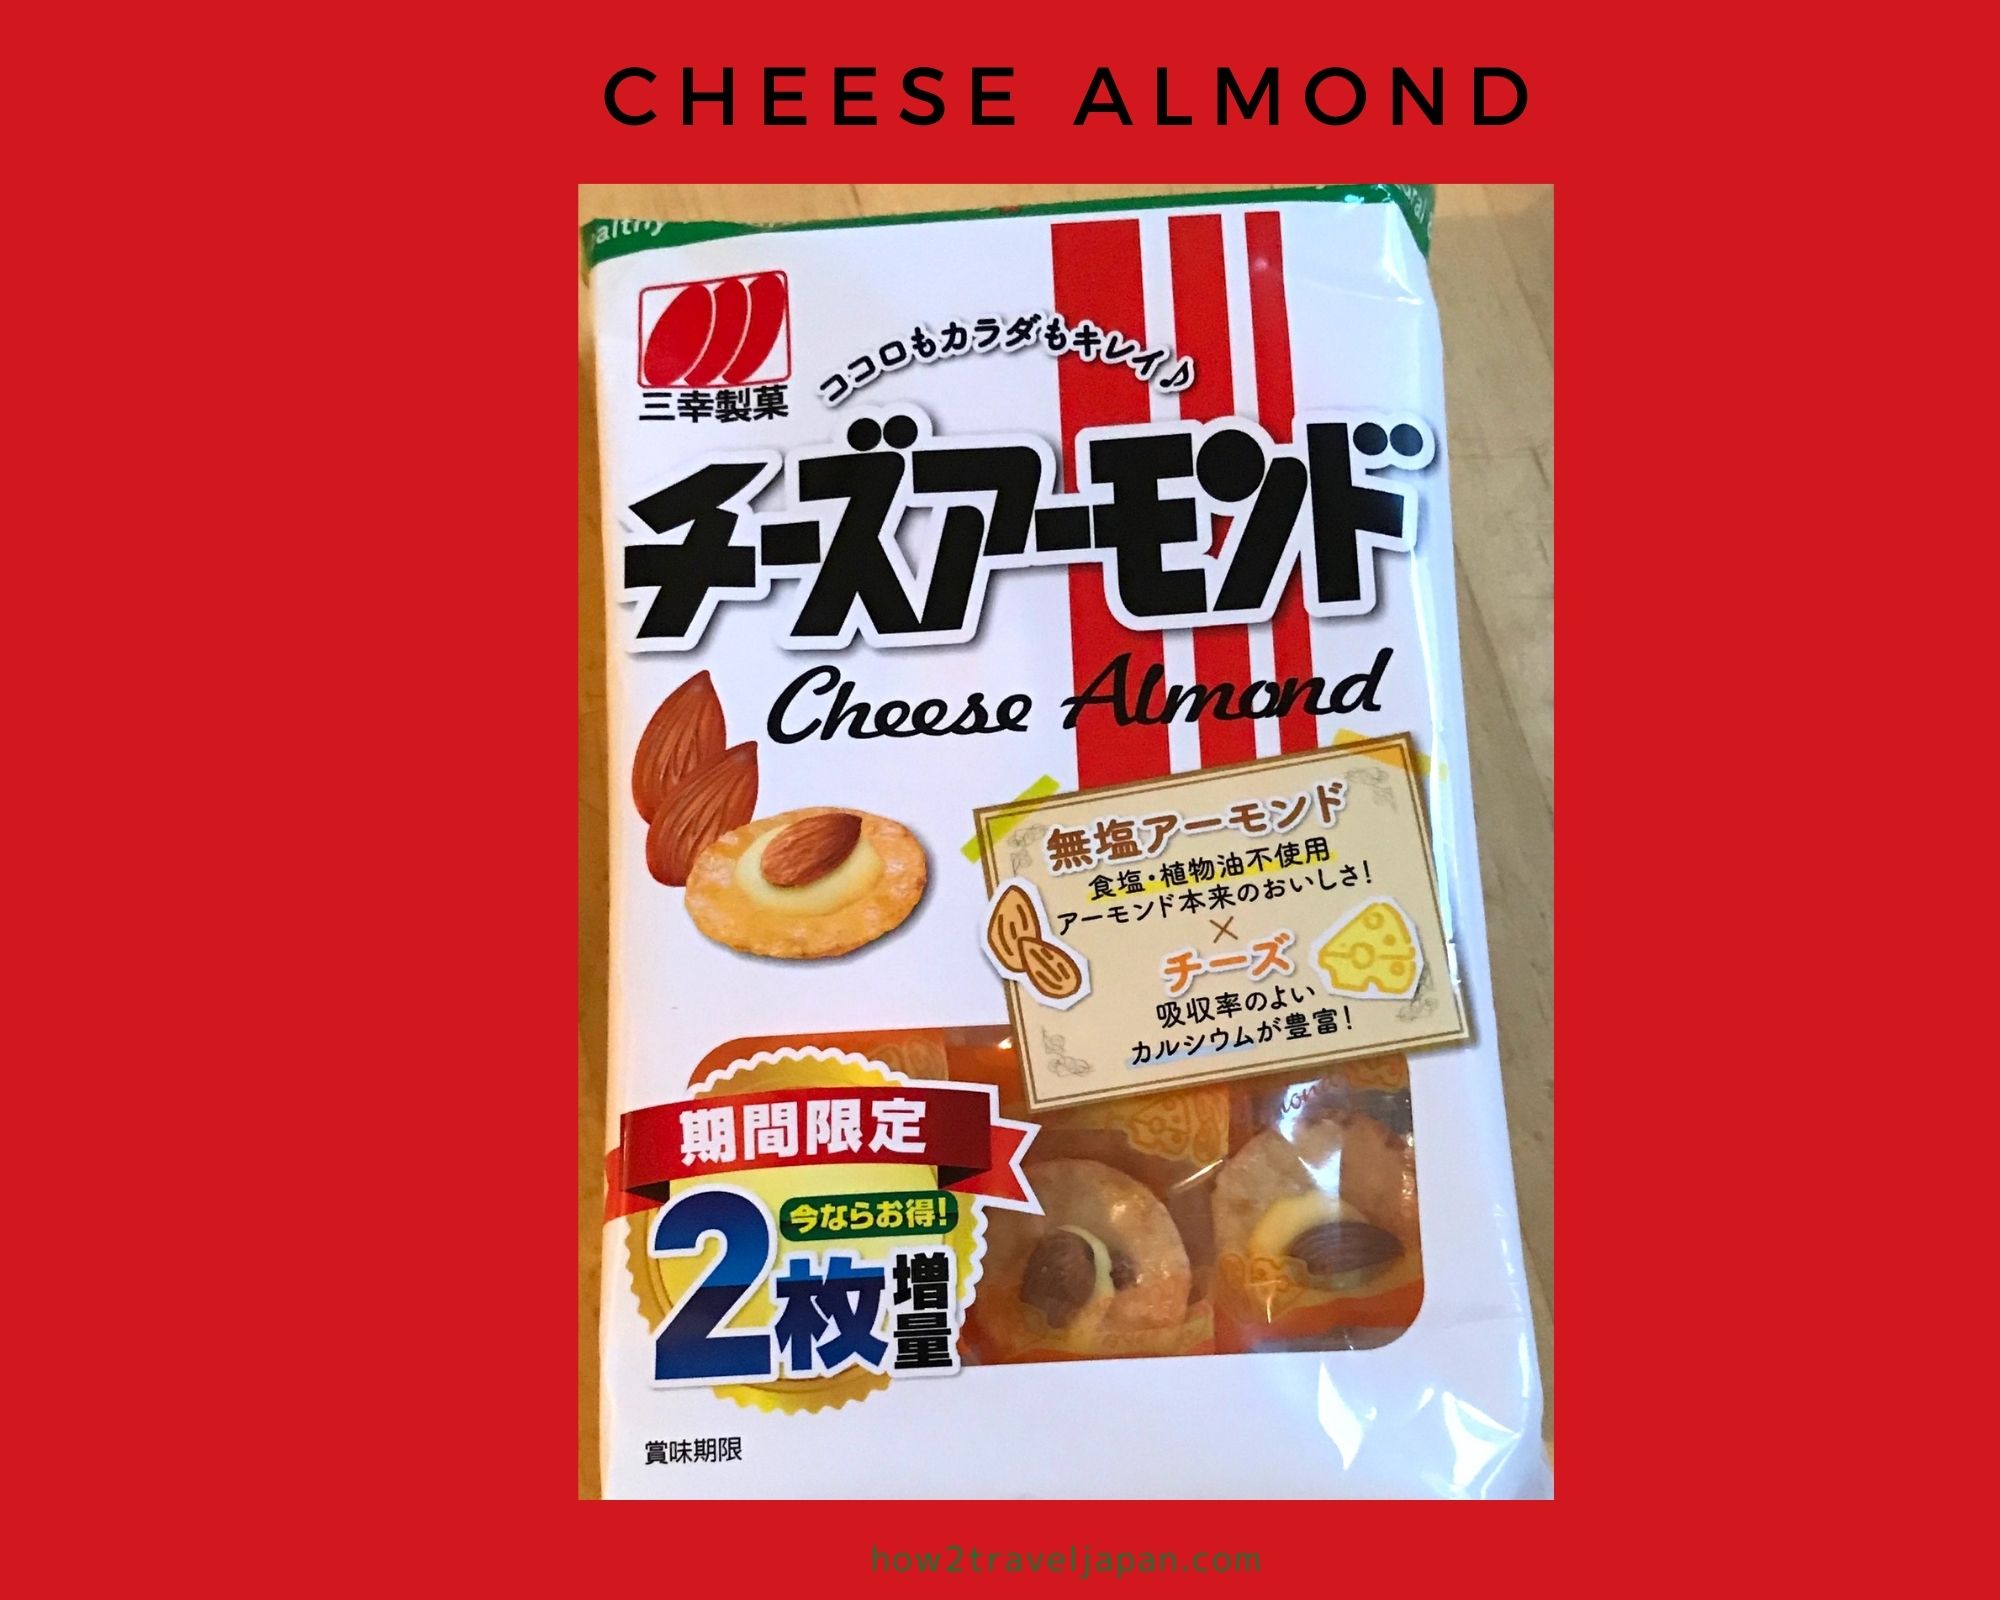 Read more about the article The cheese almond from Sanko seika